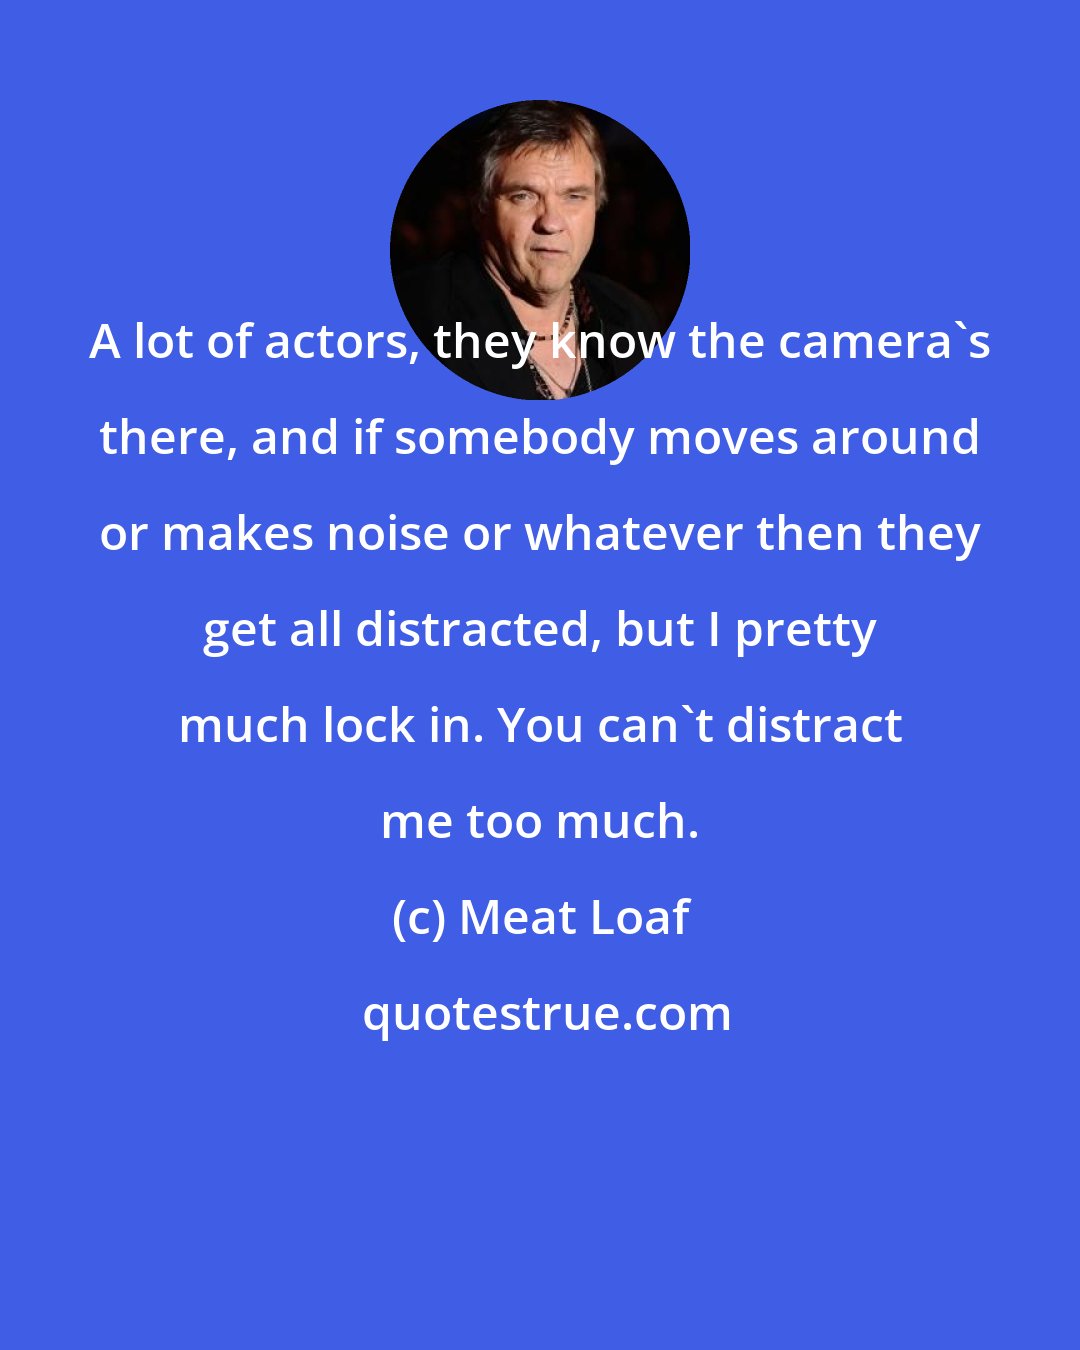 Meat Loaf: A lot of actors, they know the camera's there, and if somebody moves around or makes noise or whatever then they get all distracted, but I pretty much lock in. You can't distract me too much.